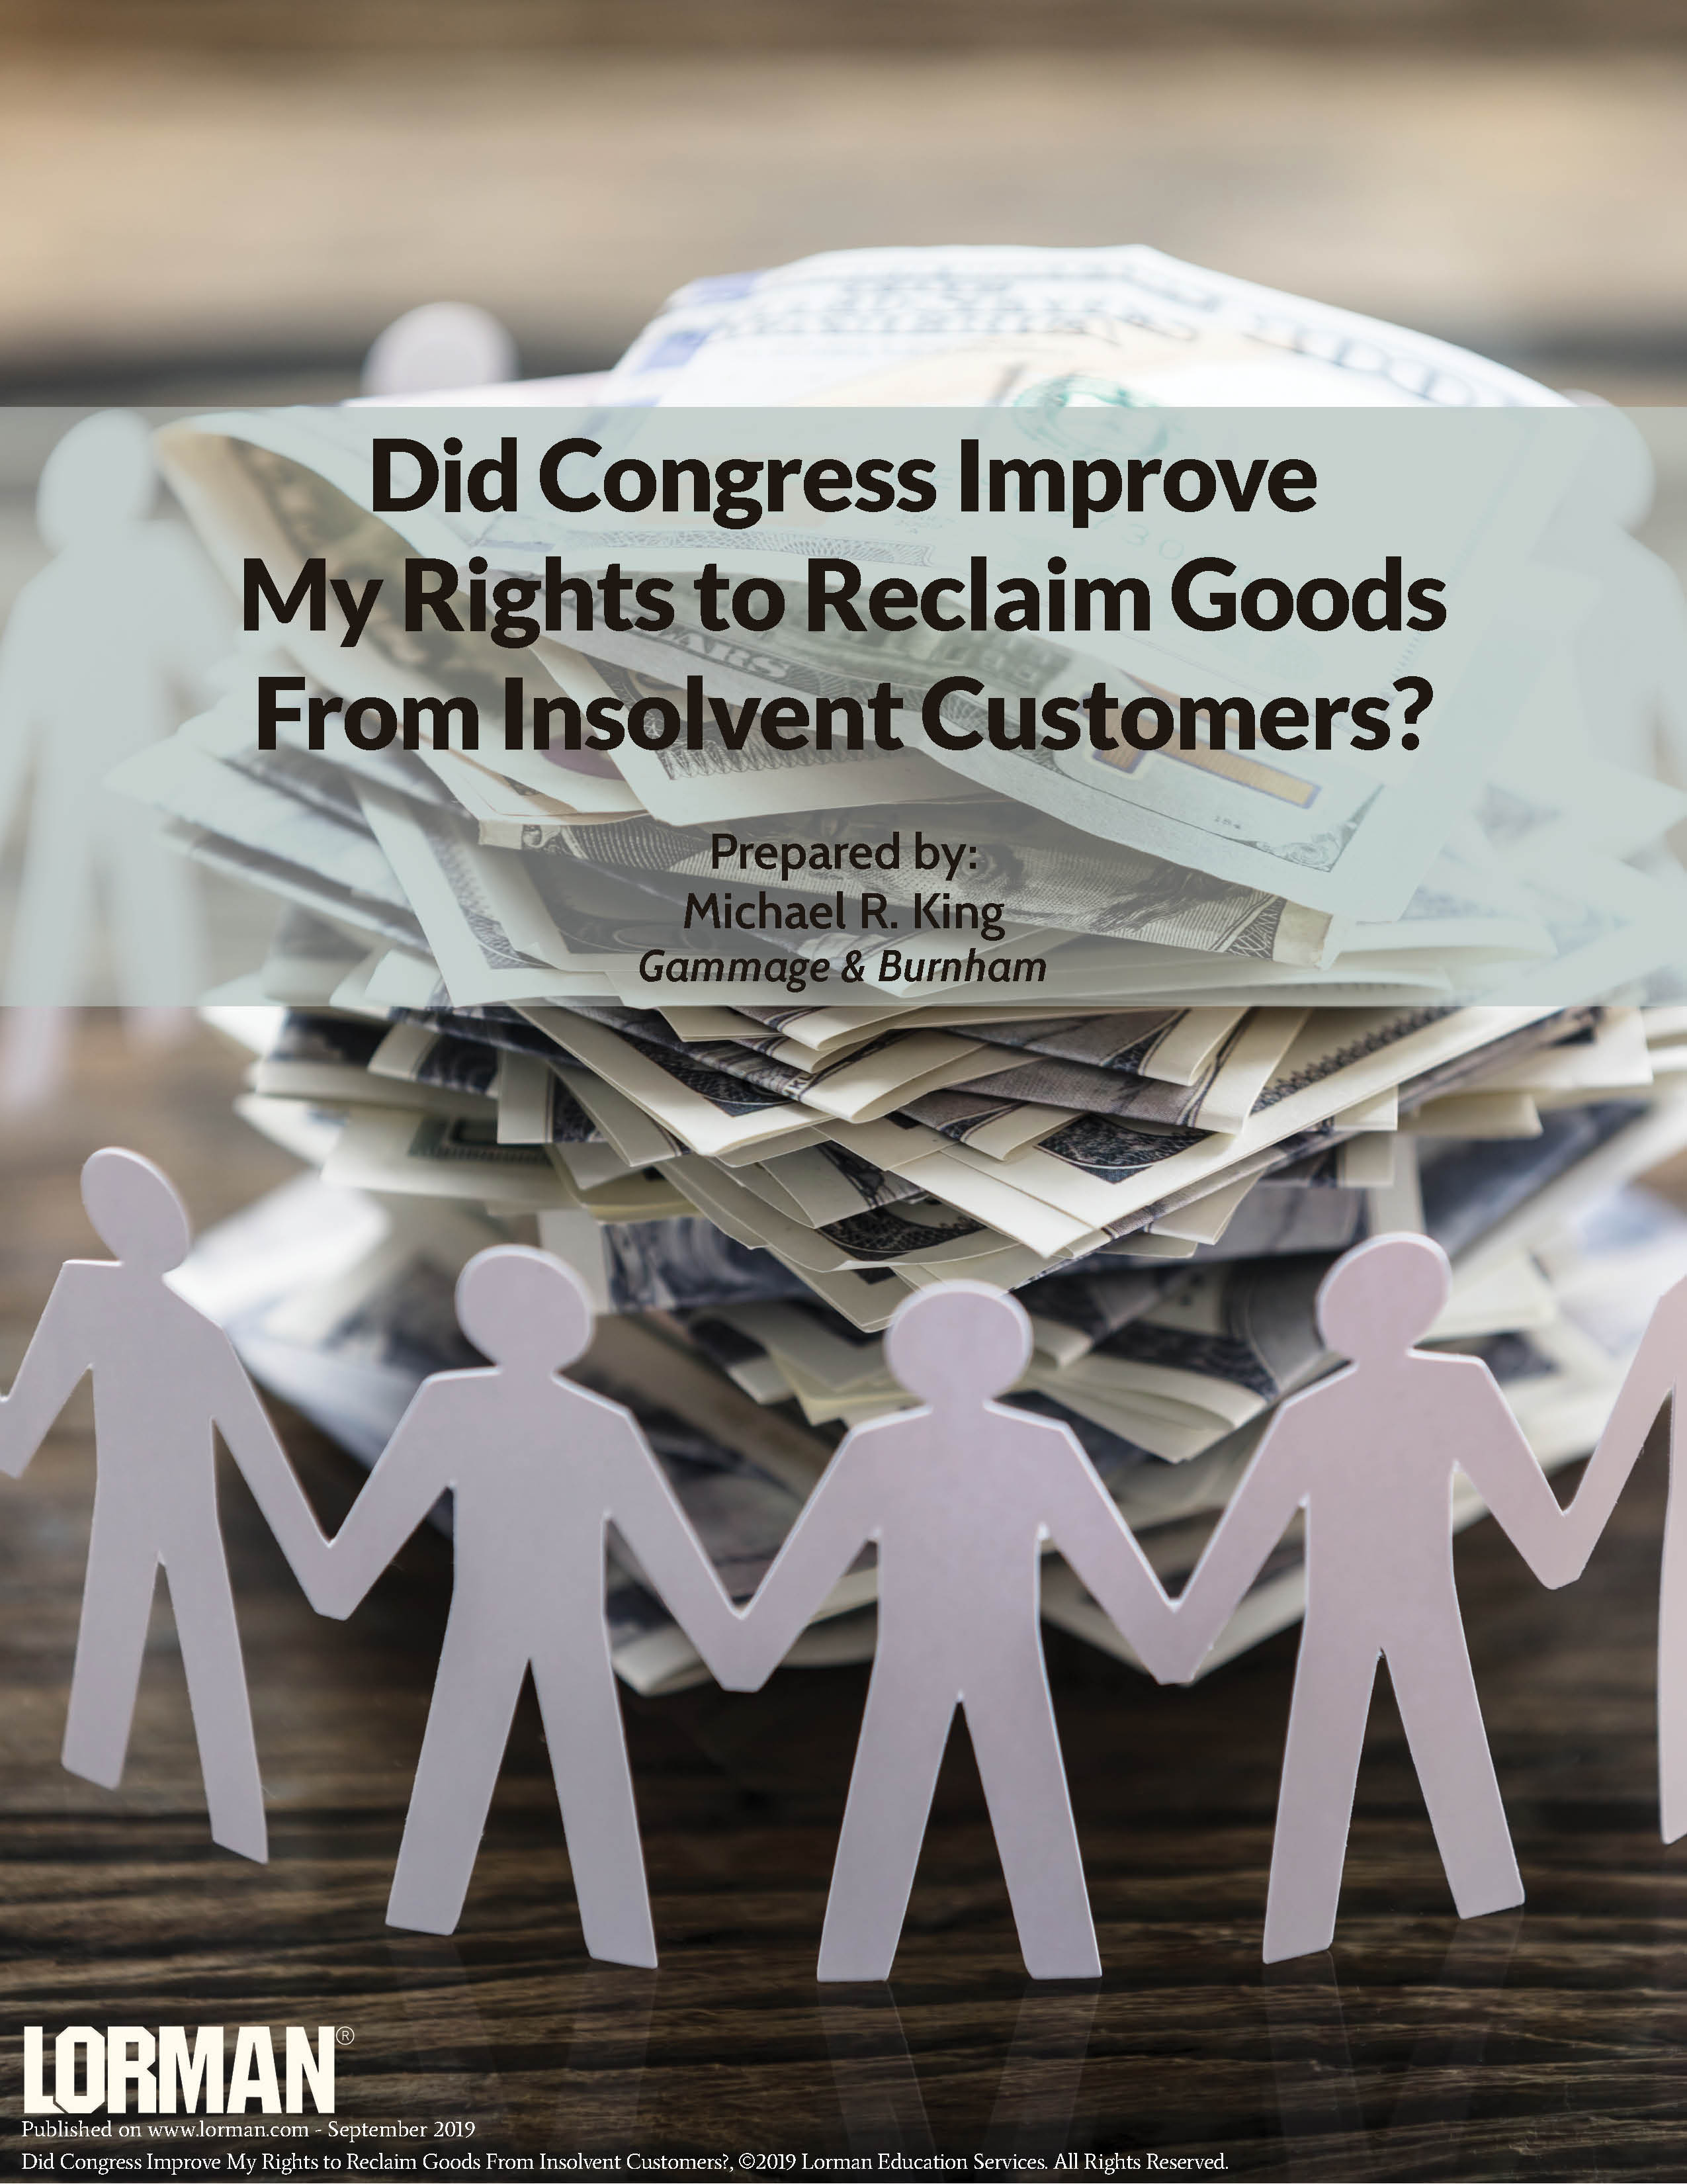 Did Congress Improve My Rights to Reclaim Goods From Insolvent Customers?